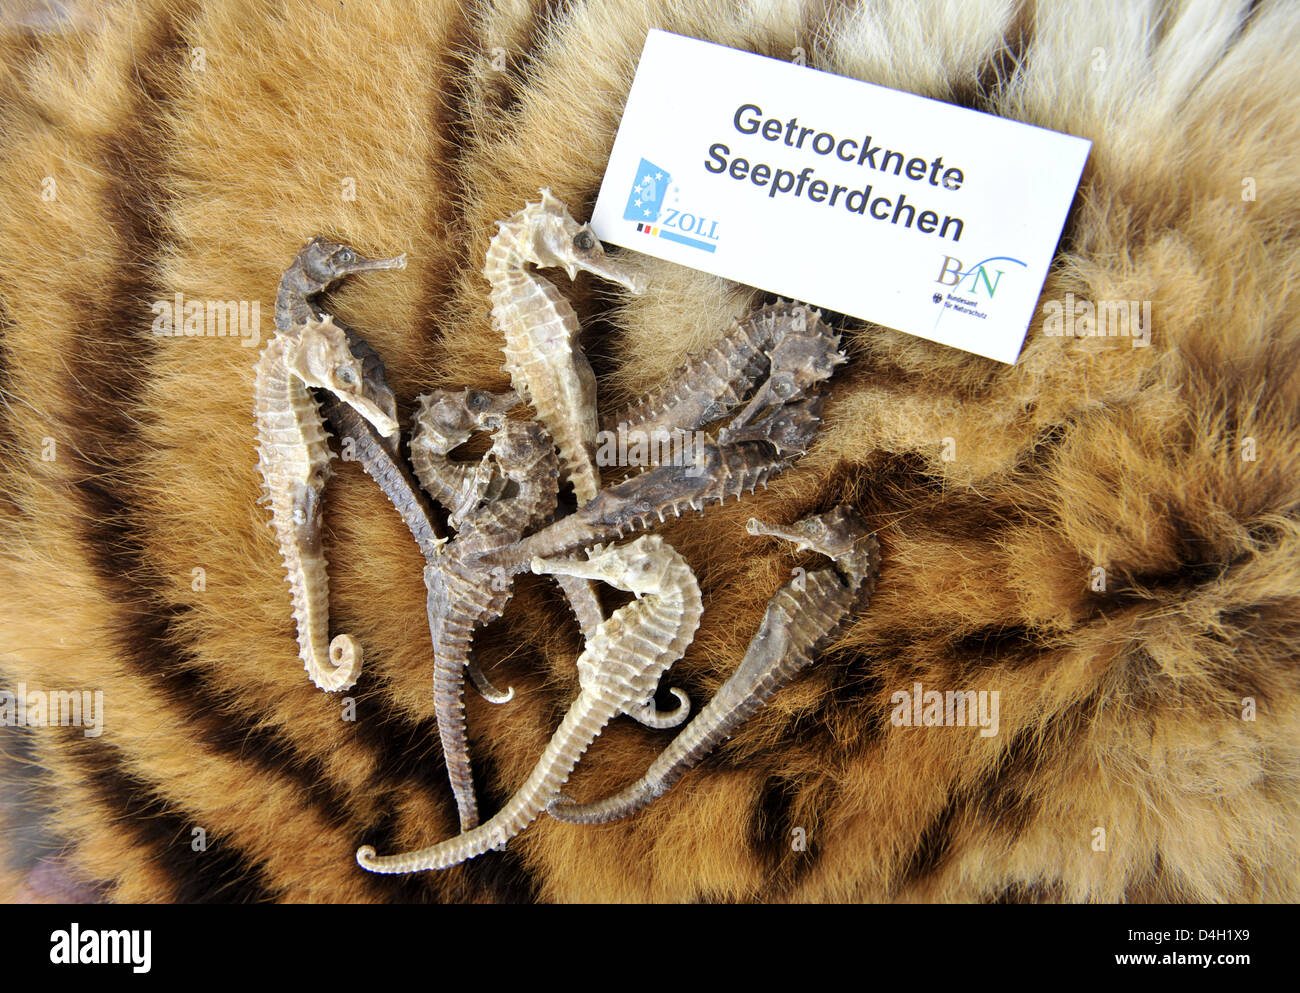 Dissected seahorses captured on a tiger fur at German customs at Franz Josef Strauss airport in Munich, Germany, 11 Juyl 2008. The customs authority presented seized animals and plant of which up to 1,500 are smuggled into Germany per year. Photo: Peter Kneffel Stock Photo